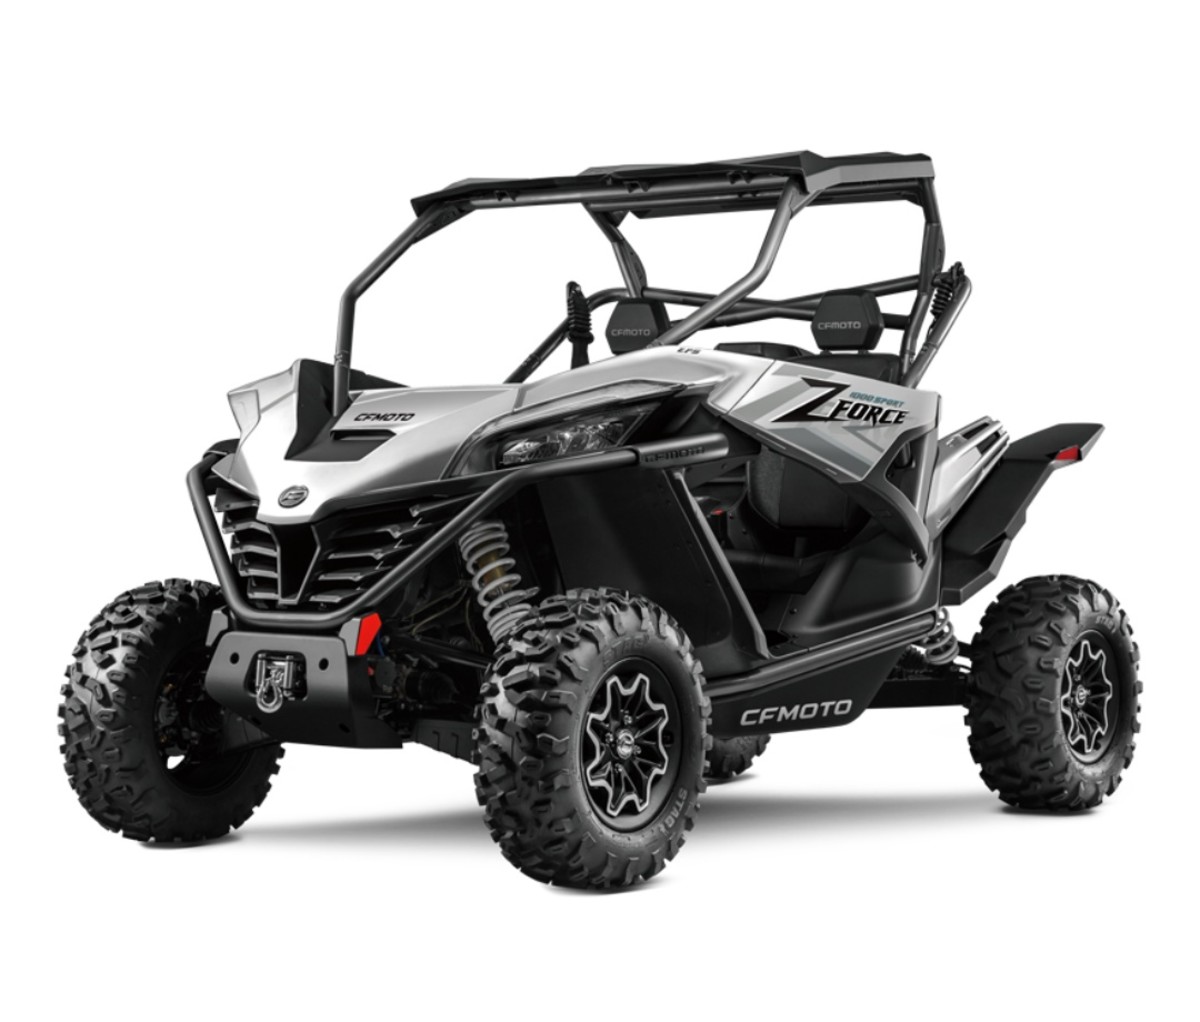 ZFORCE 950 H.O. Sport in white and black on a white background. side-by-side UTVs